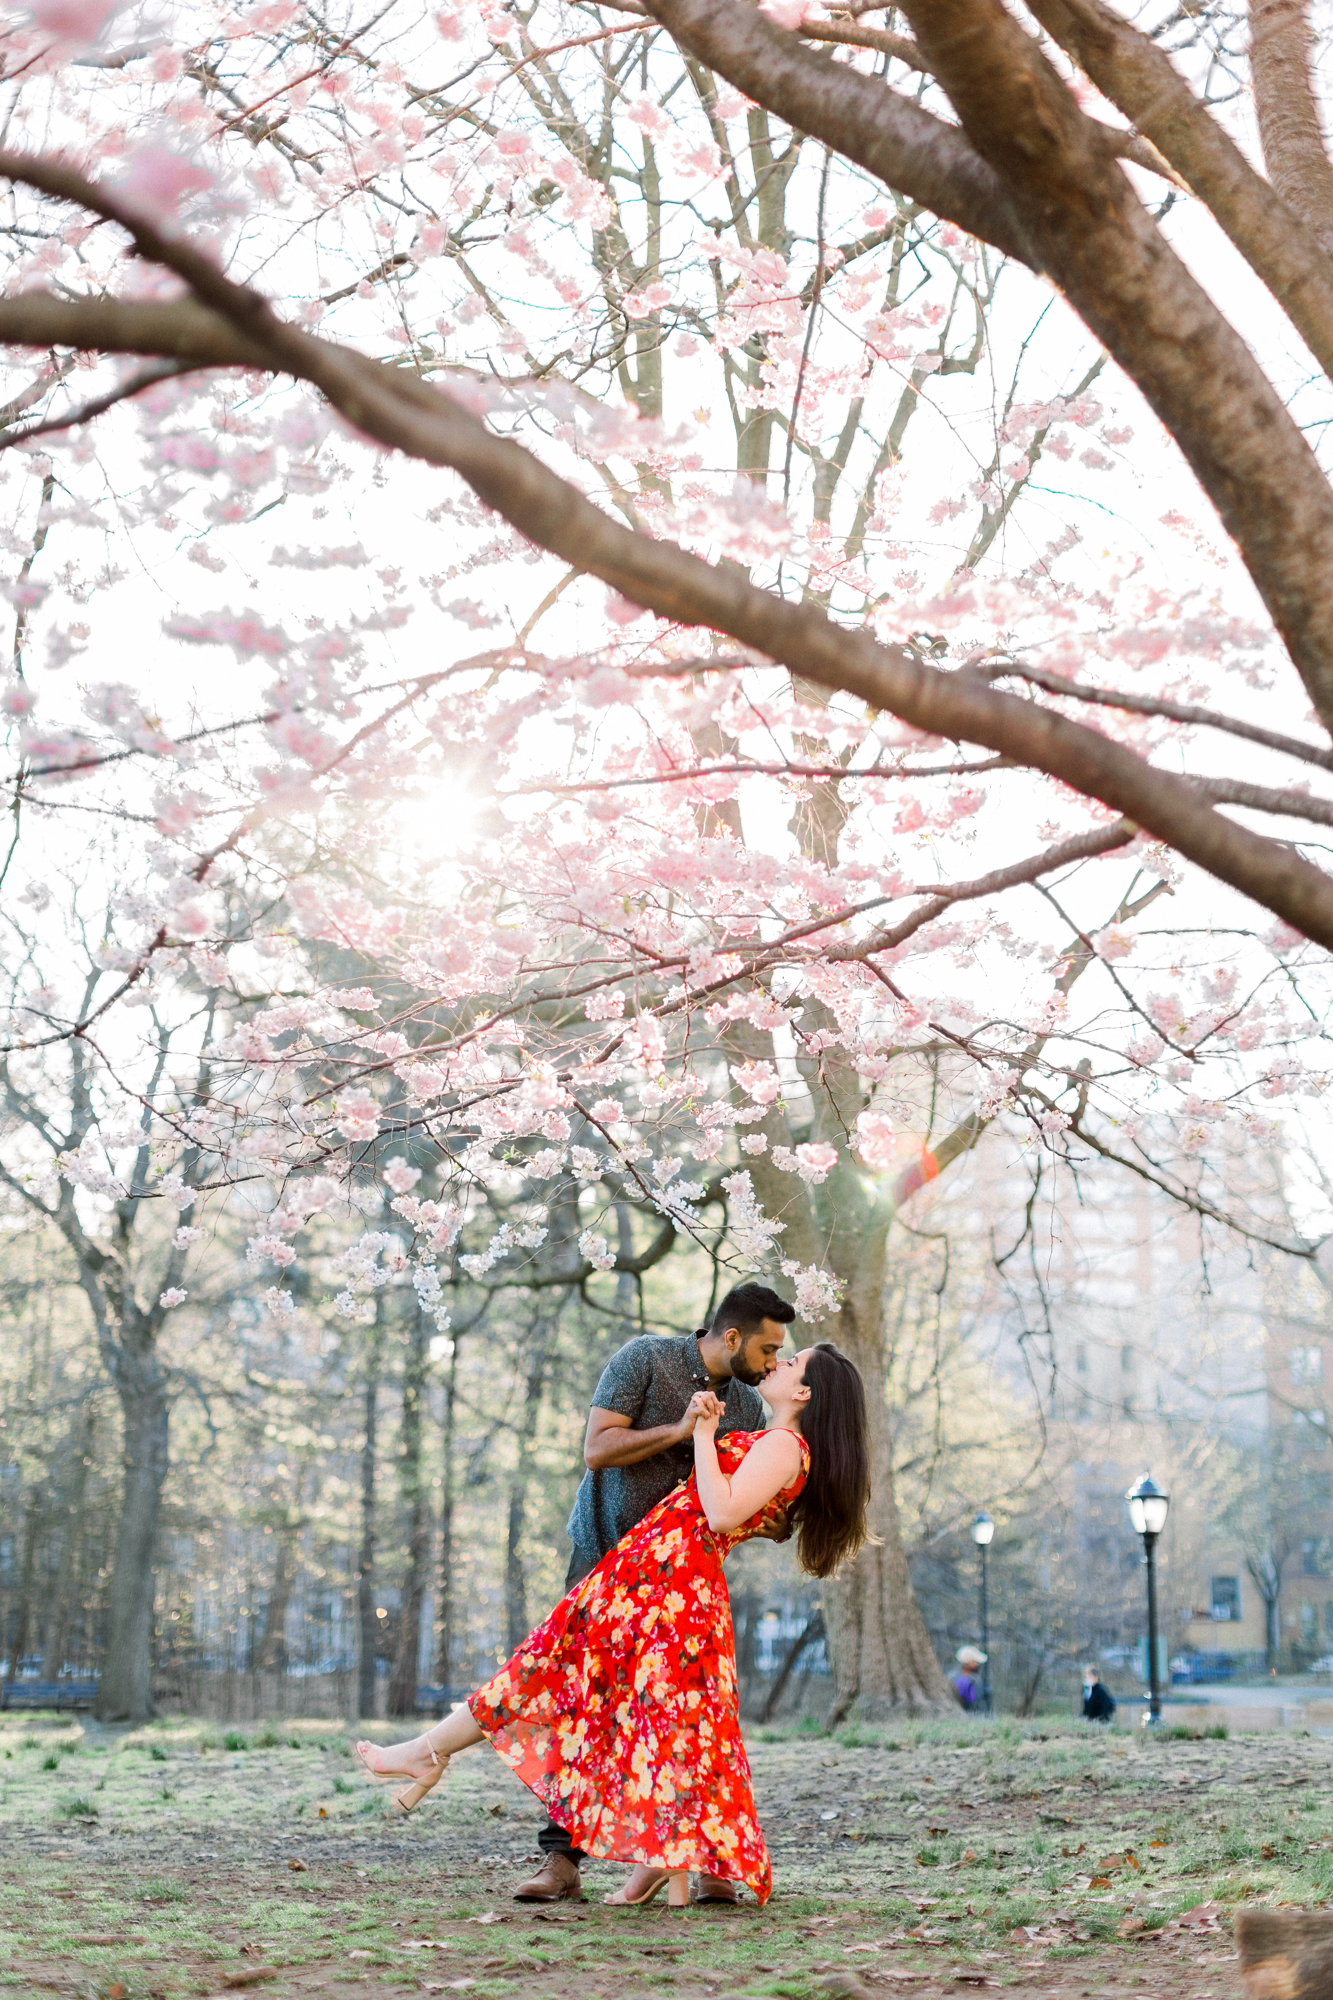 Picturesque New York Engagement Photography with Spring Blossoms